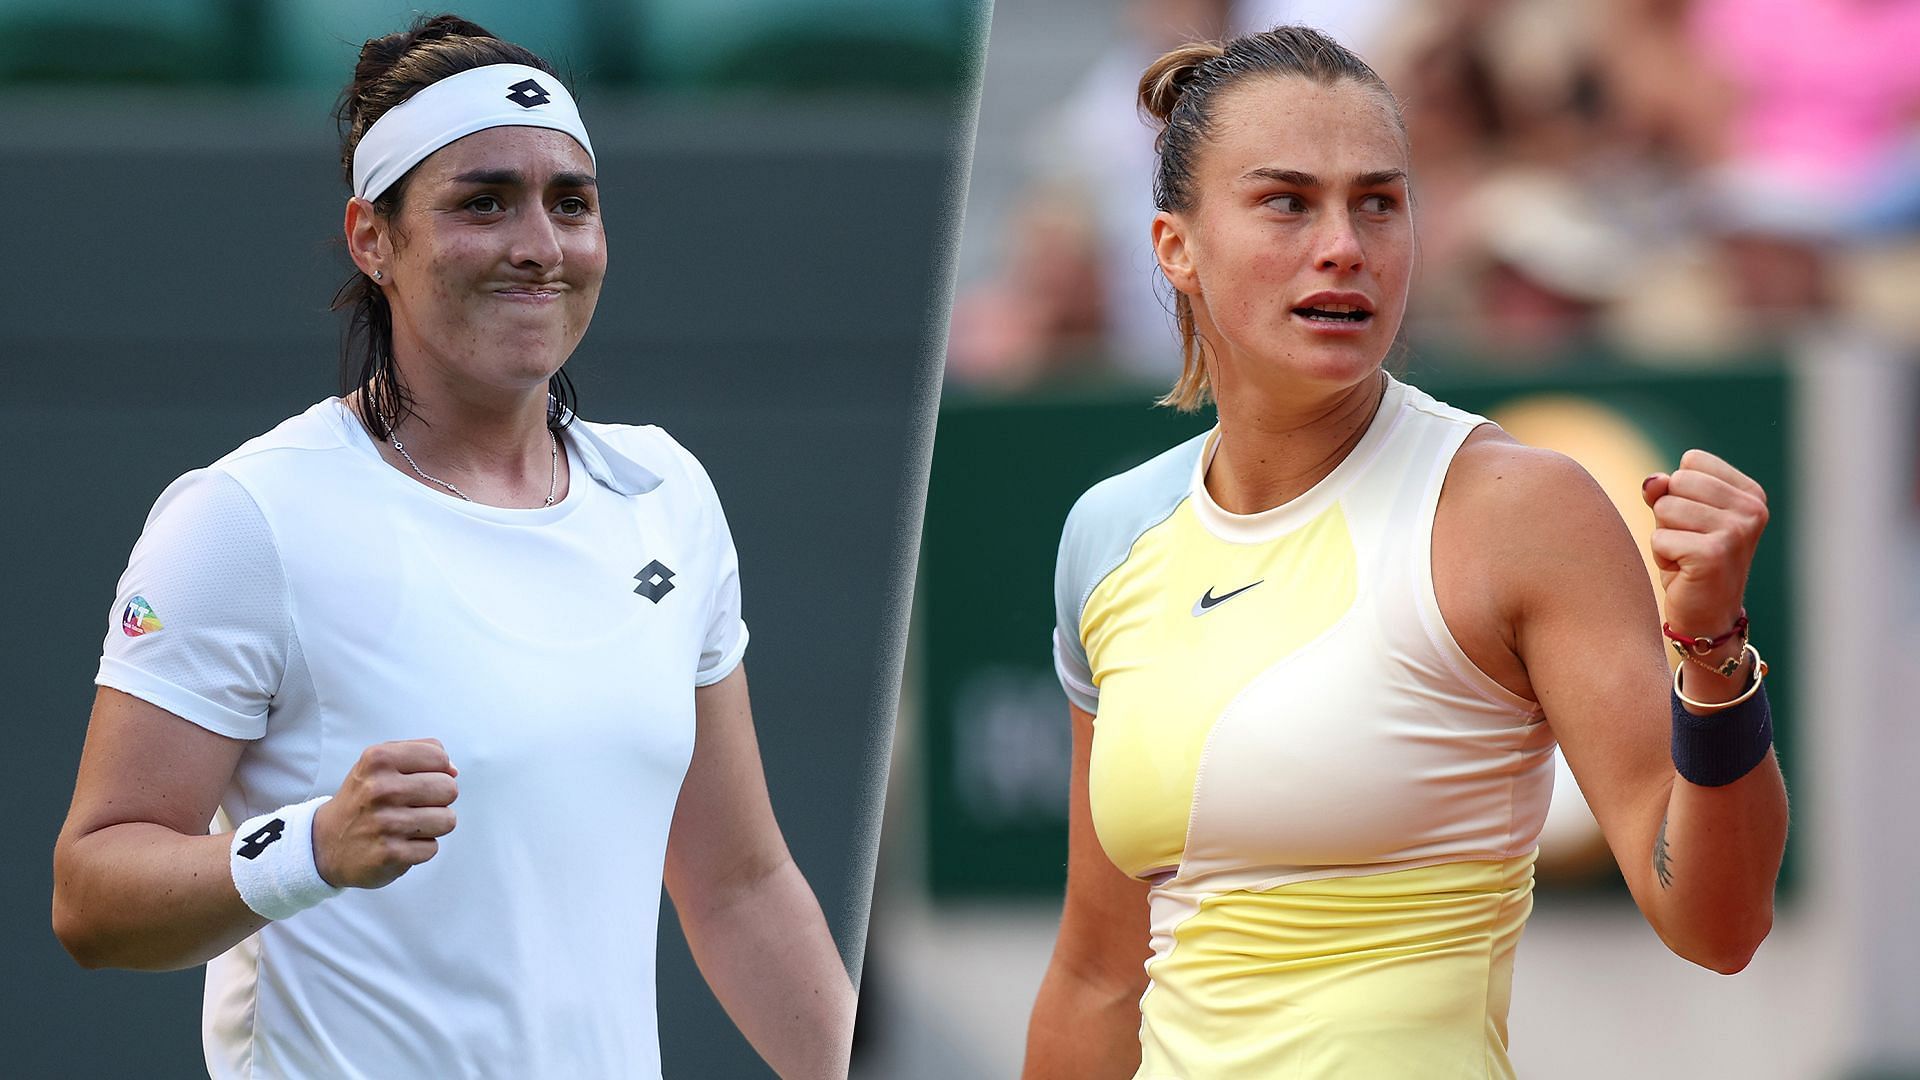 Jabeur and Sabalenka will lock horns in a round-robin match the WTA Finals.